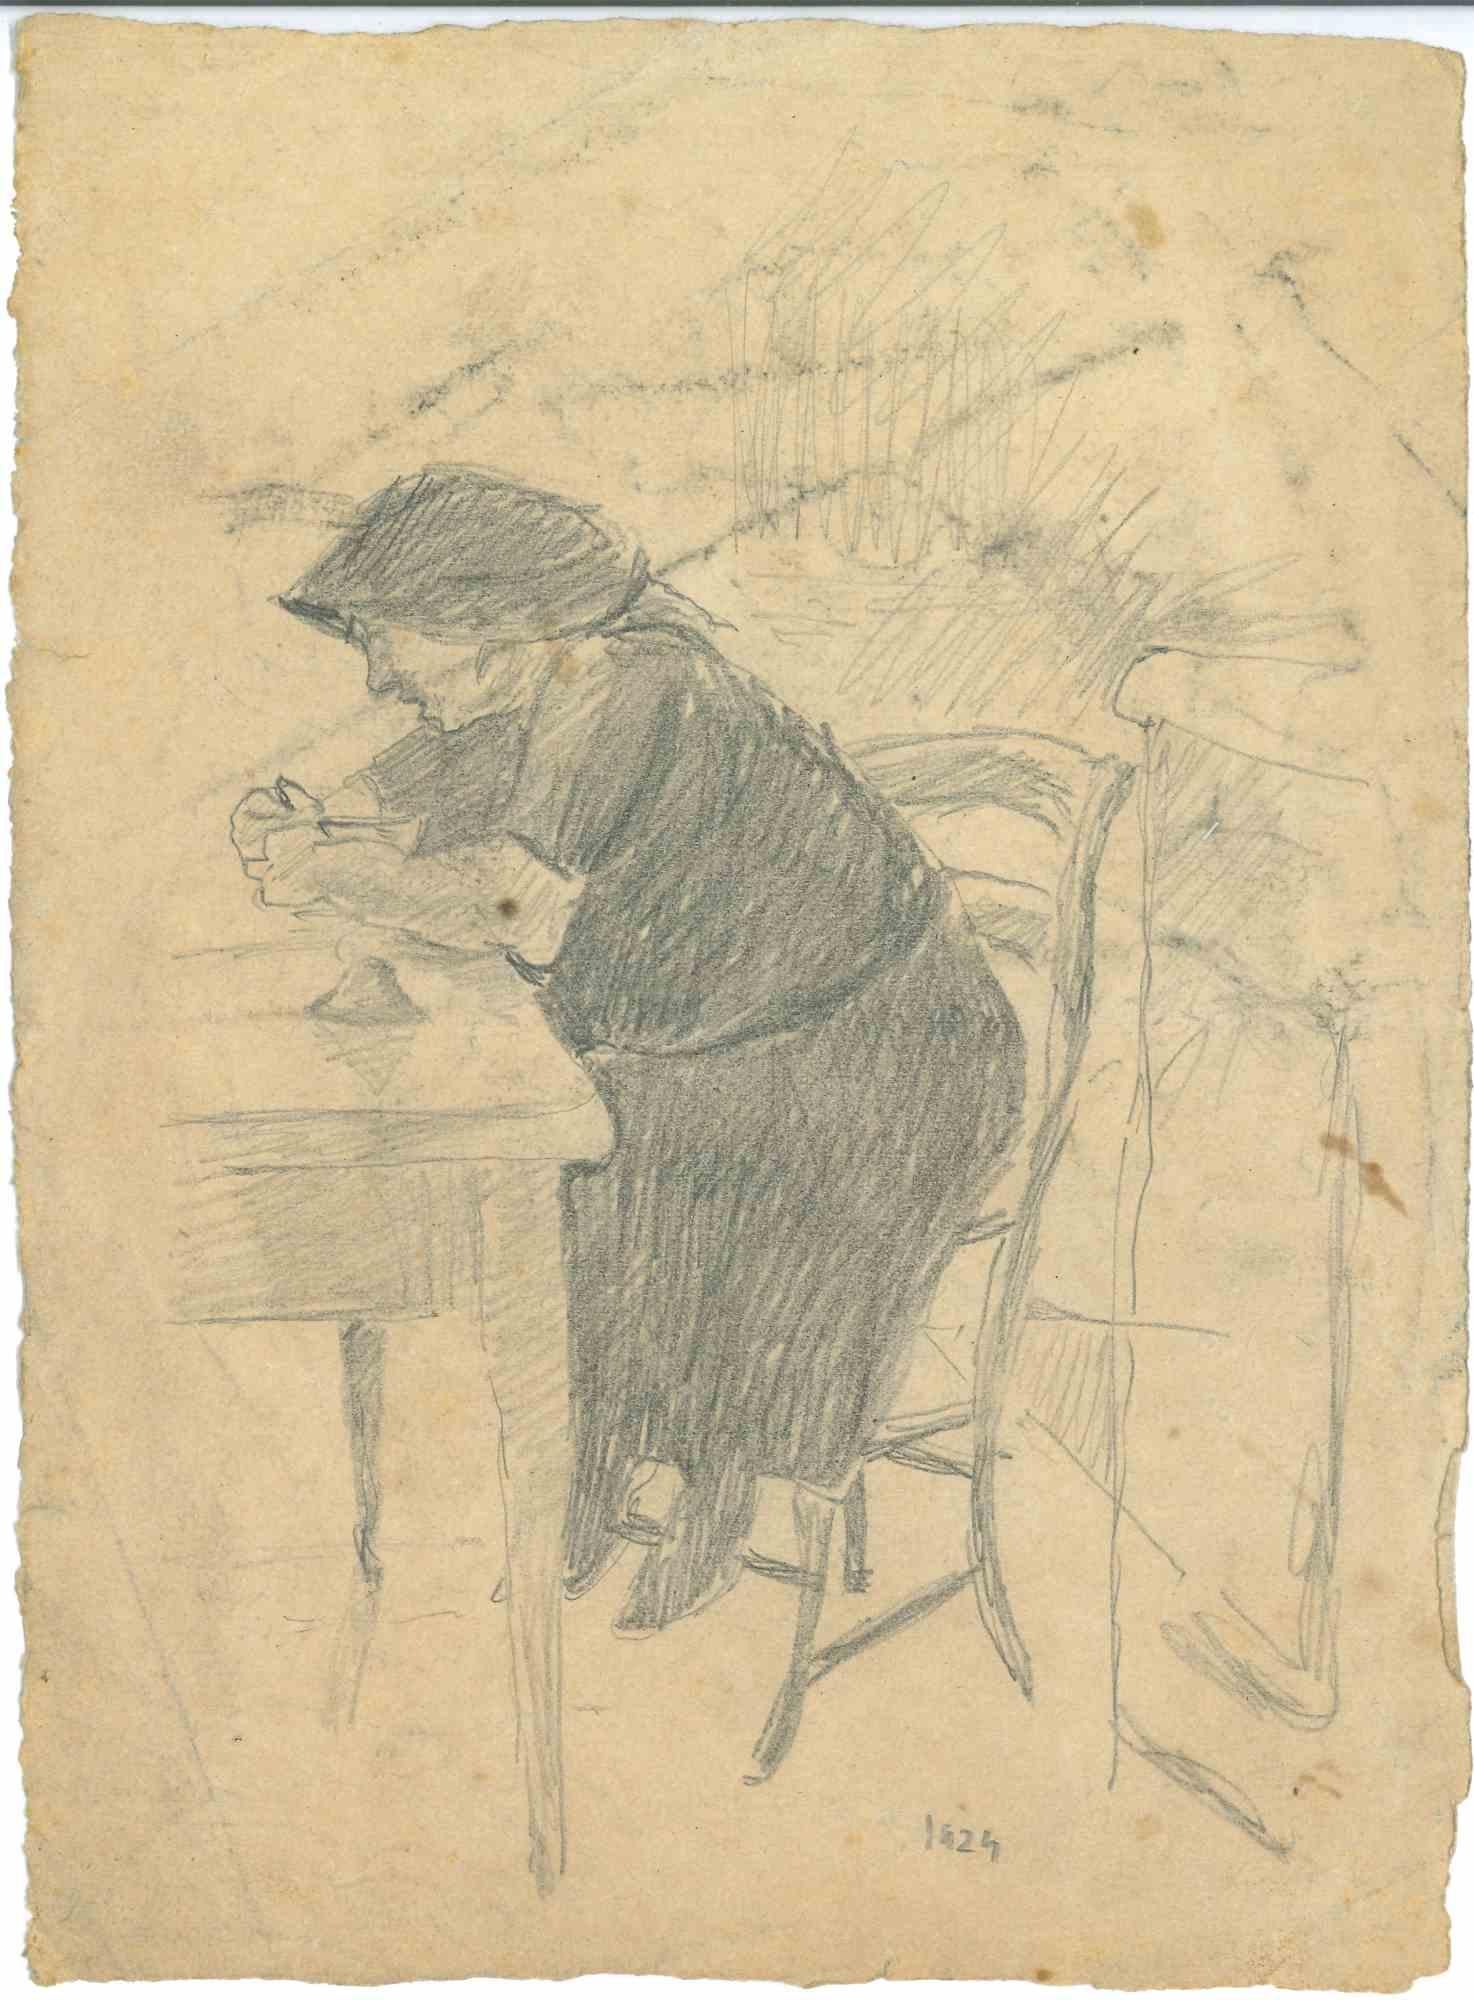 The Seated Woman is an Original Drawing in pencil on creamy-colored paper realized by Mino Maccari in 1924.

Quite good conditions and aged, with some minor folds.

Mino Maccari (1898-1989) was an Italian writer, painter, engraver, and journalist,